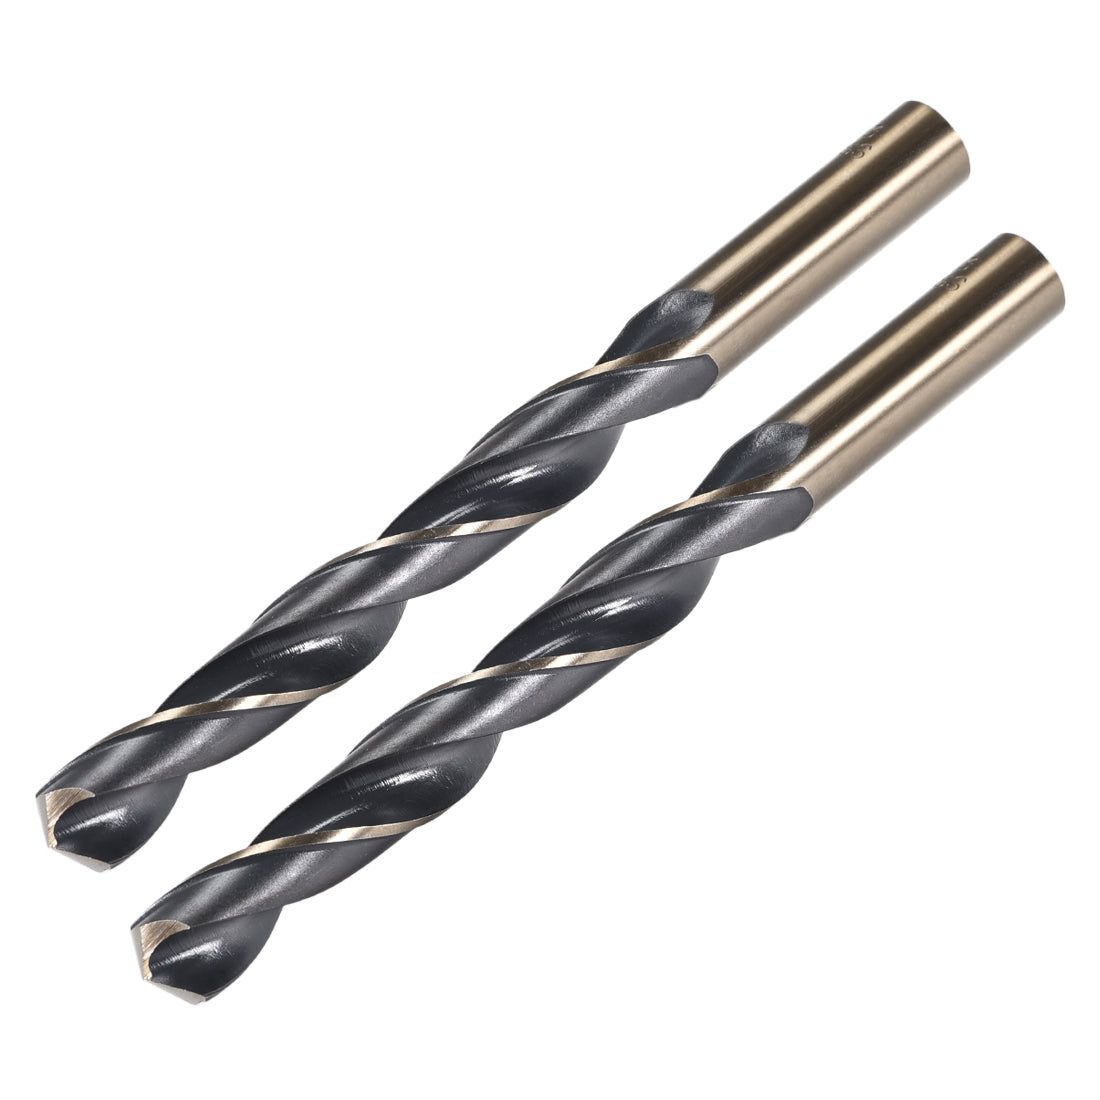 uxcell Uxcell Straight Shank Twist Drill Bits 13mm HSS 4341 with 13mm Shank 2 Pcs